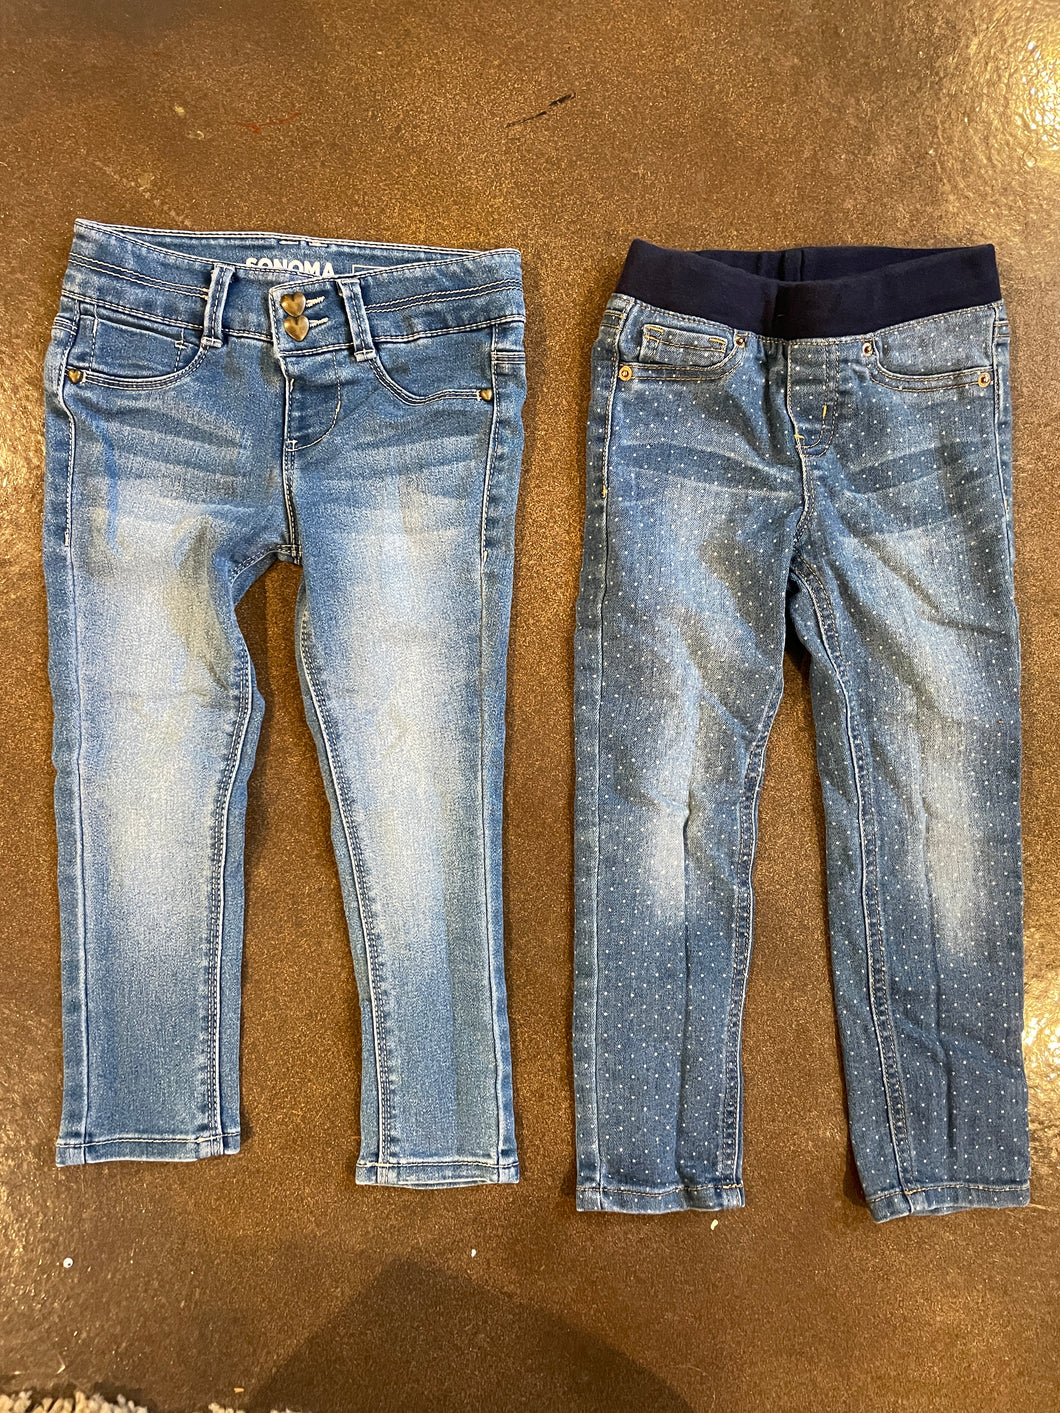 2 pairs of stretchy jeans size 4t 4T